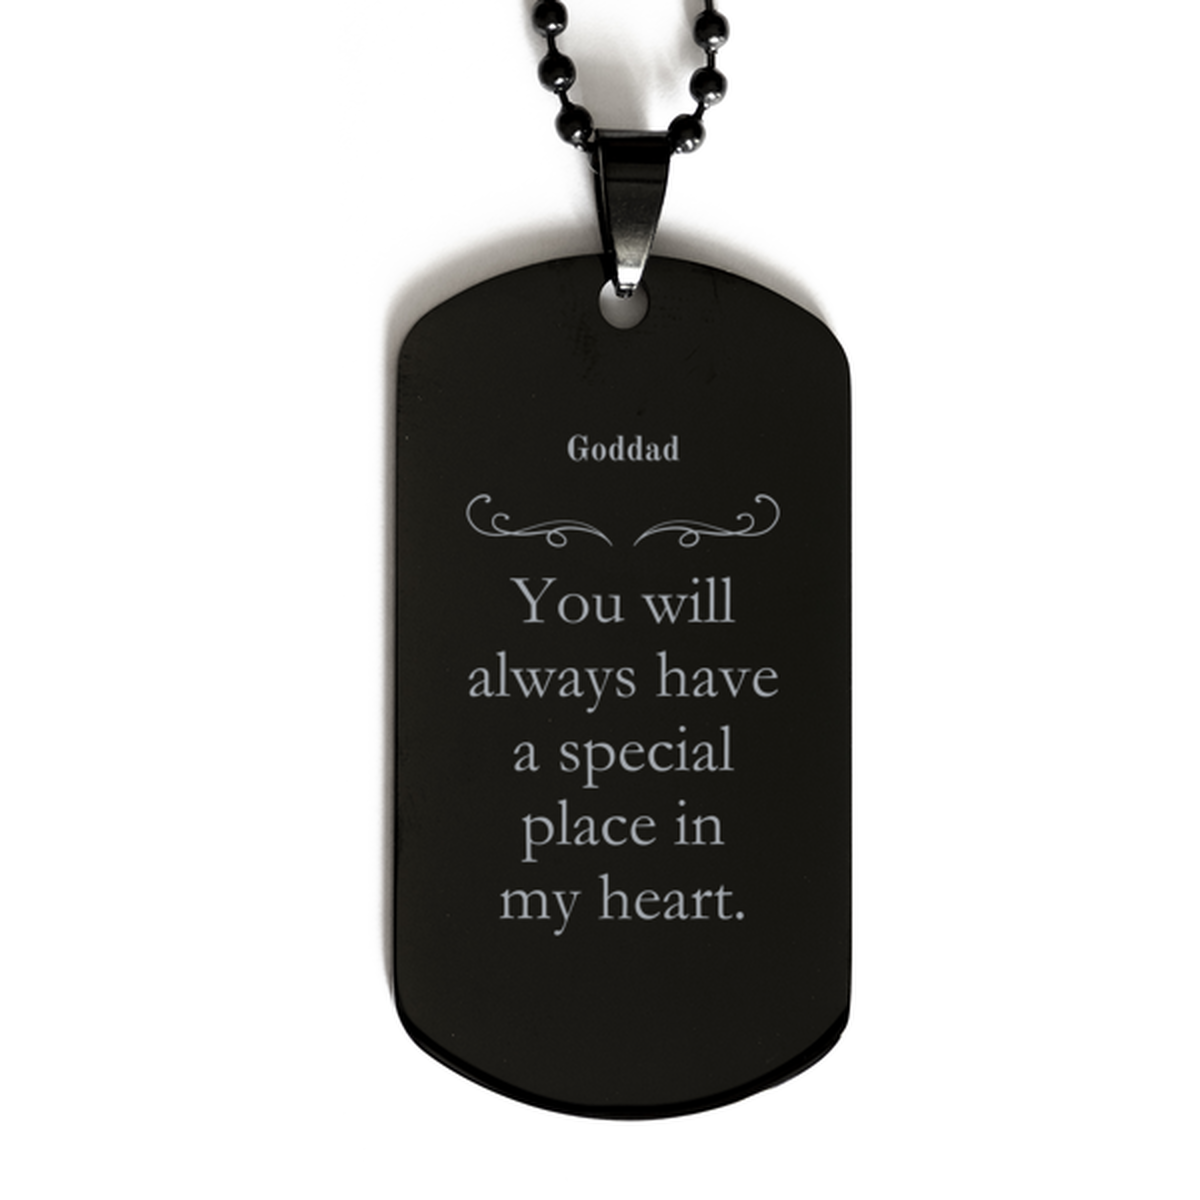 Goddad Engraved Black Dog Tag - Always in My Heart - Unique Gift for Veterans Day, Christmas, Birthday - Perfect Personalized Keepsake for Dad from Daughter or Son